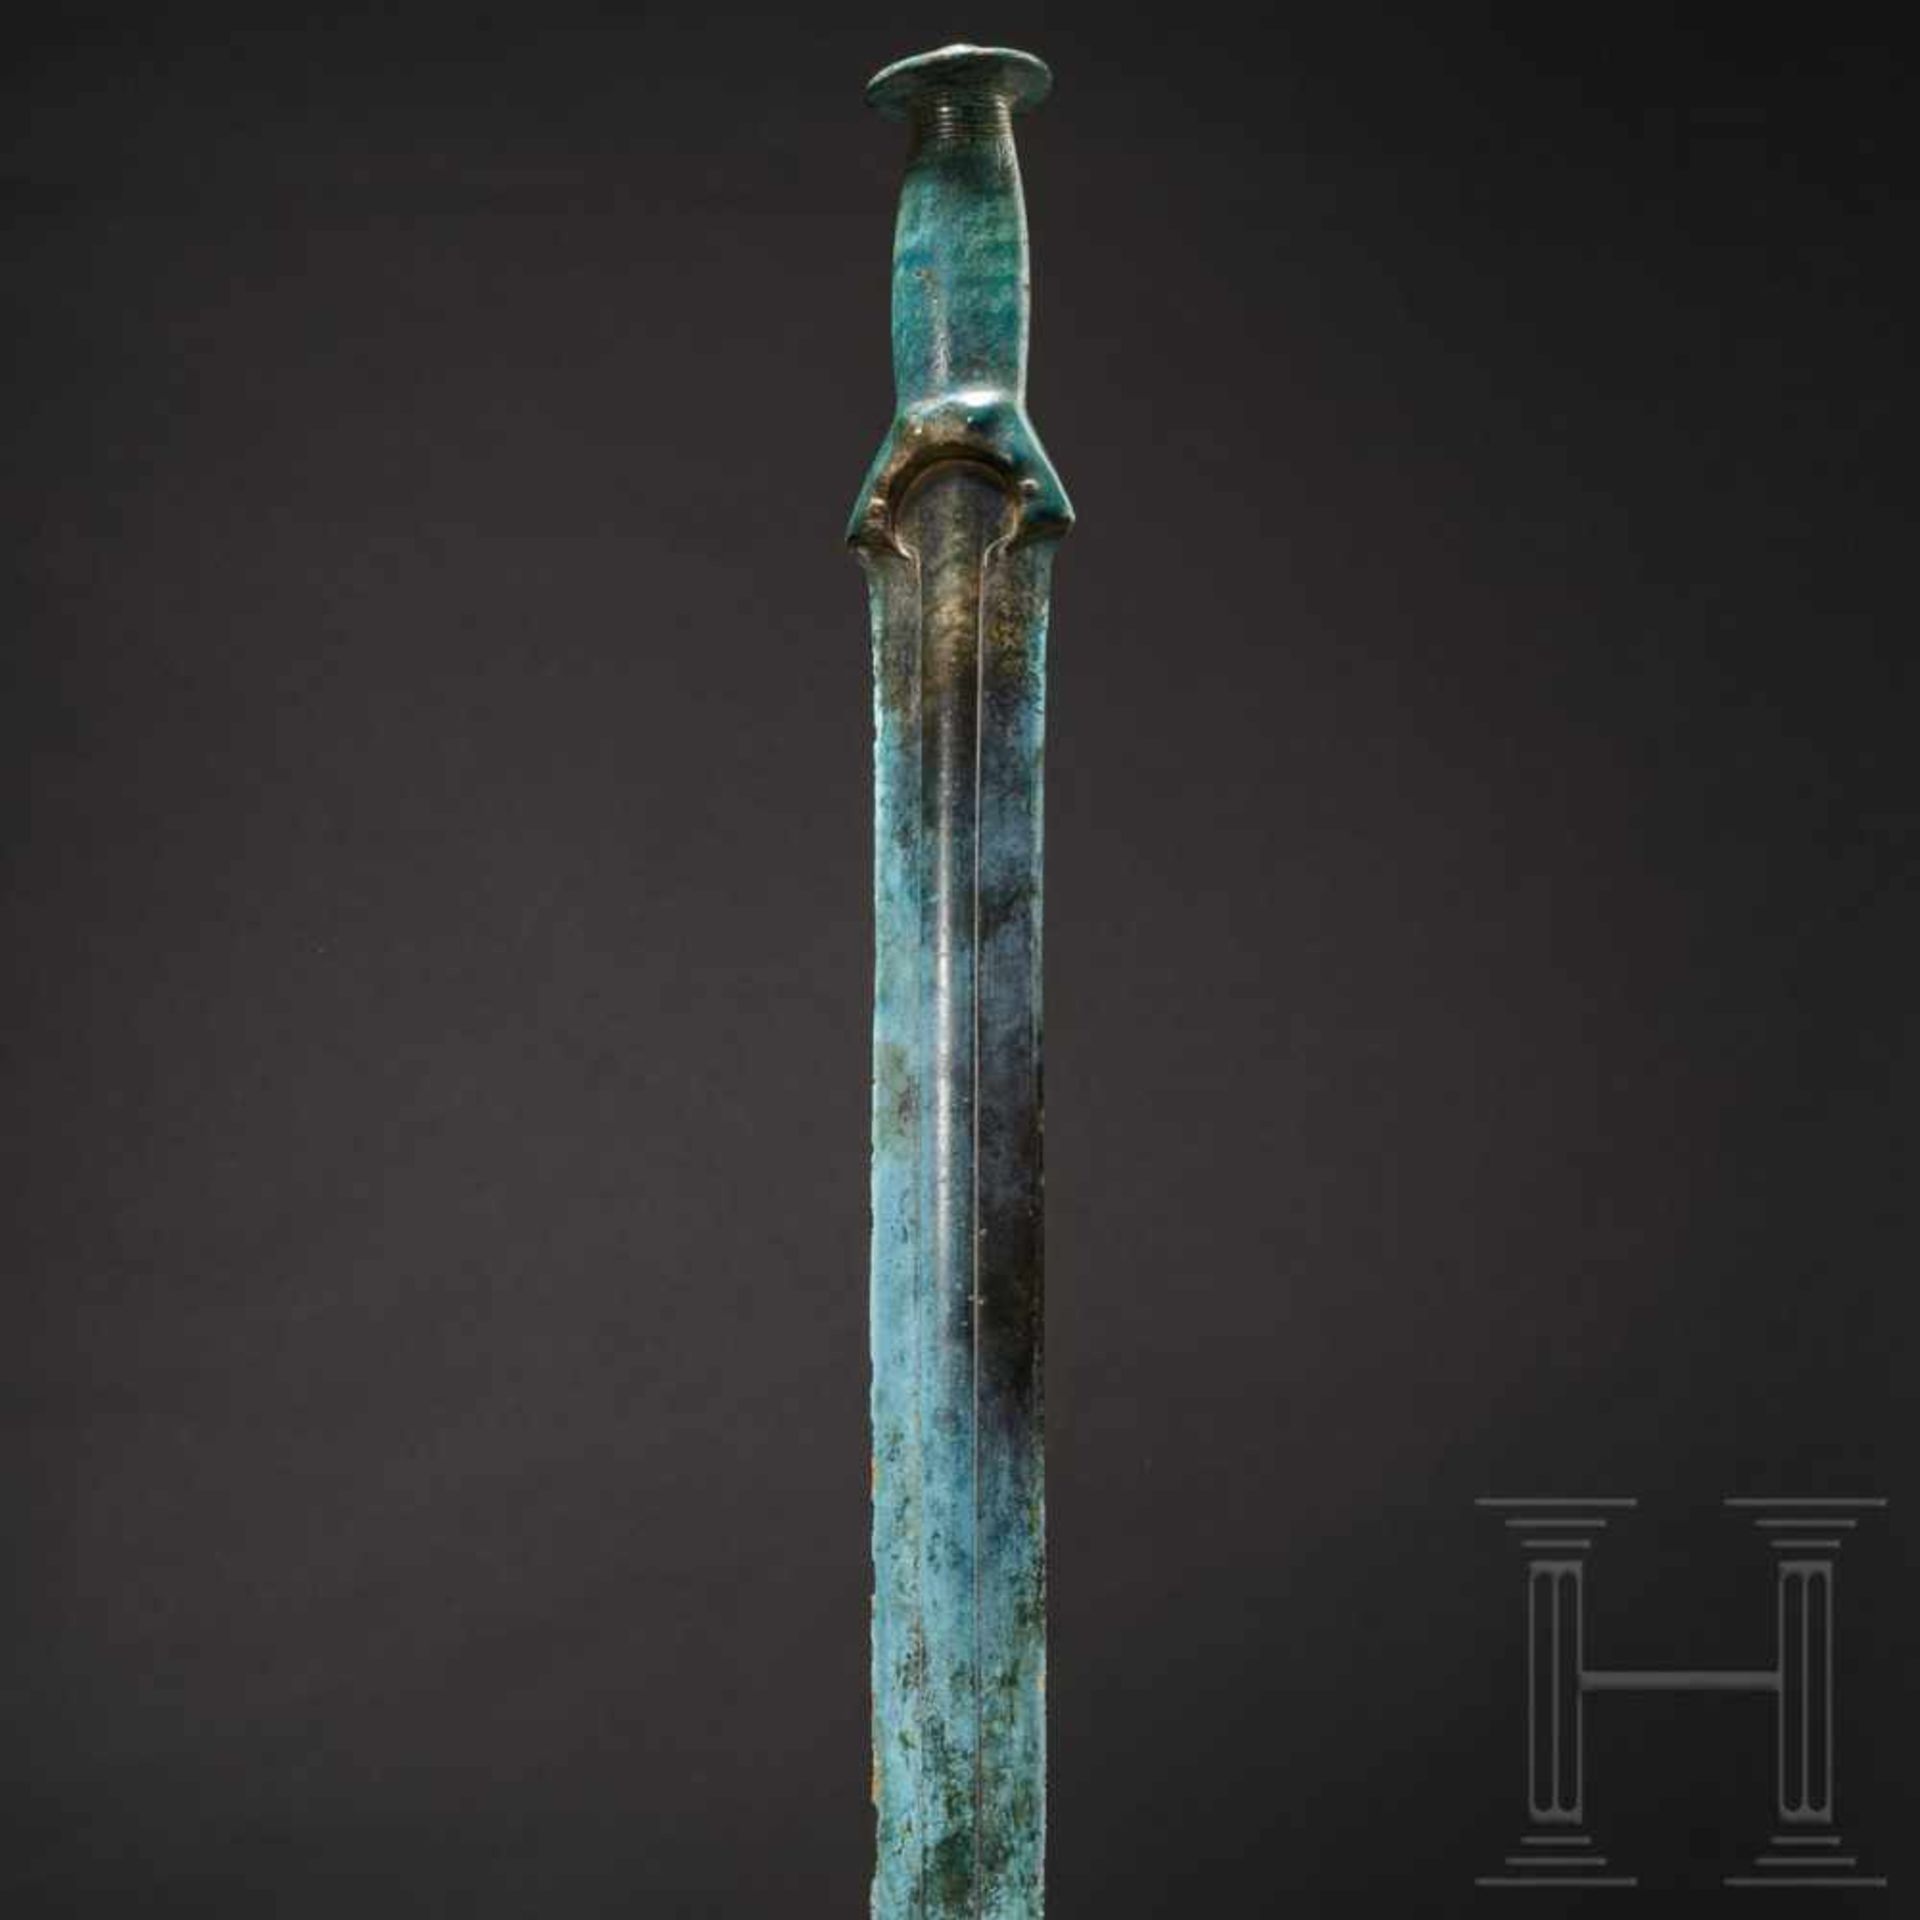 A German bronze sword of the Riegsee type, 1300 – 1200 B.C.A beautifully preserved bronze sword with